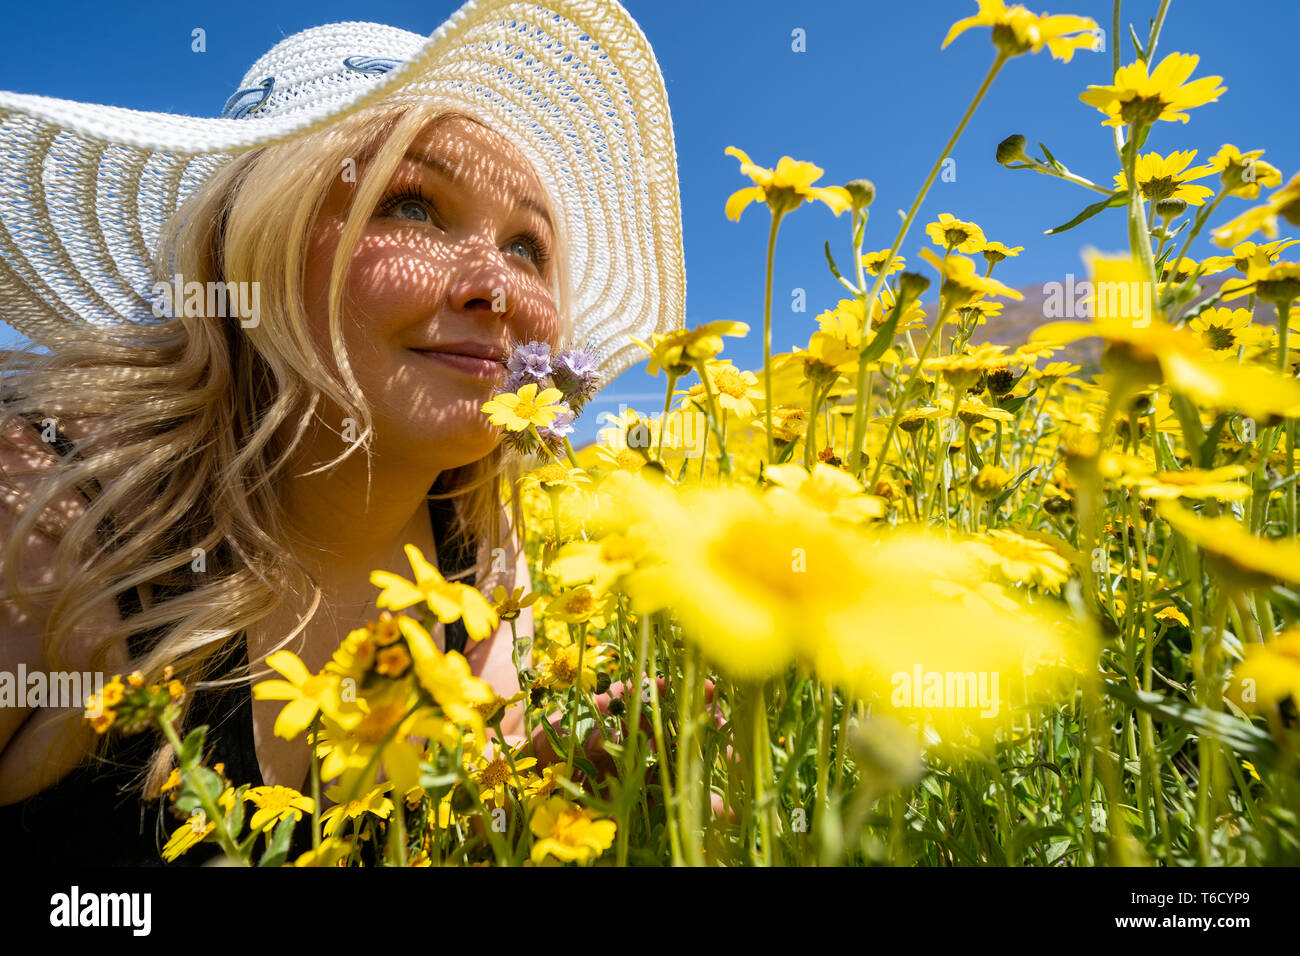 Blonde woman wearing straw white hat smelling a field of yellow wildflowers. Concept for springtime allergy relief Stock Photo